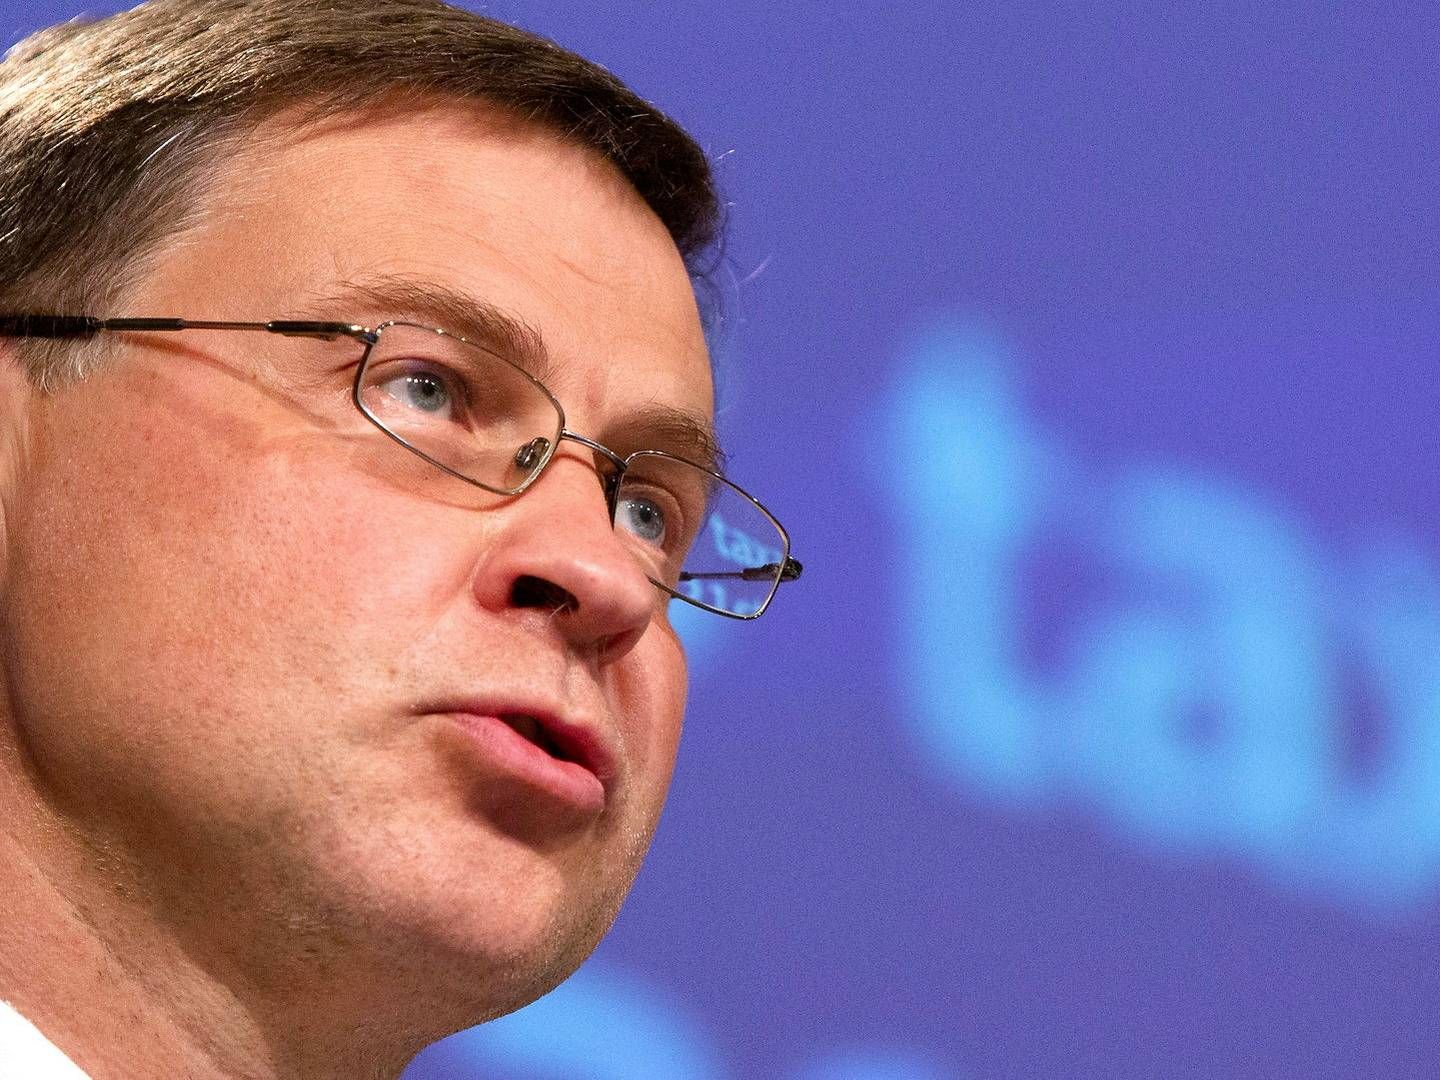 Ahead of a meeting between EU's energy ministers, the EU Commission still has no roadmap for energy crisis, says Valdis Dombrovskis, Executive Vice President of the European Commission for an Economy that Works for People. (ARCHIVE)